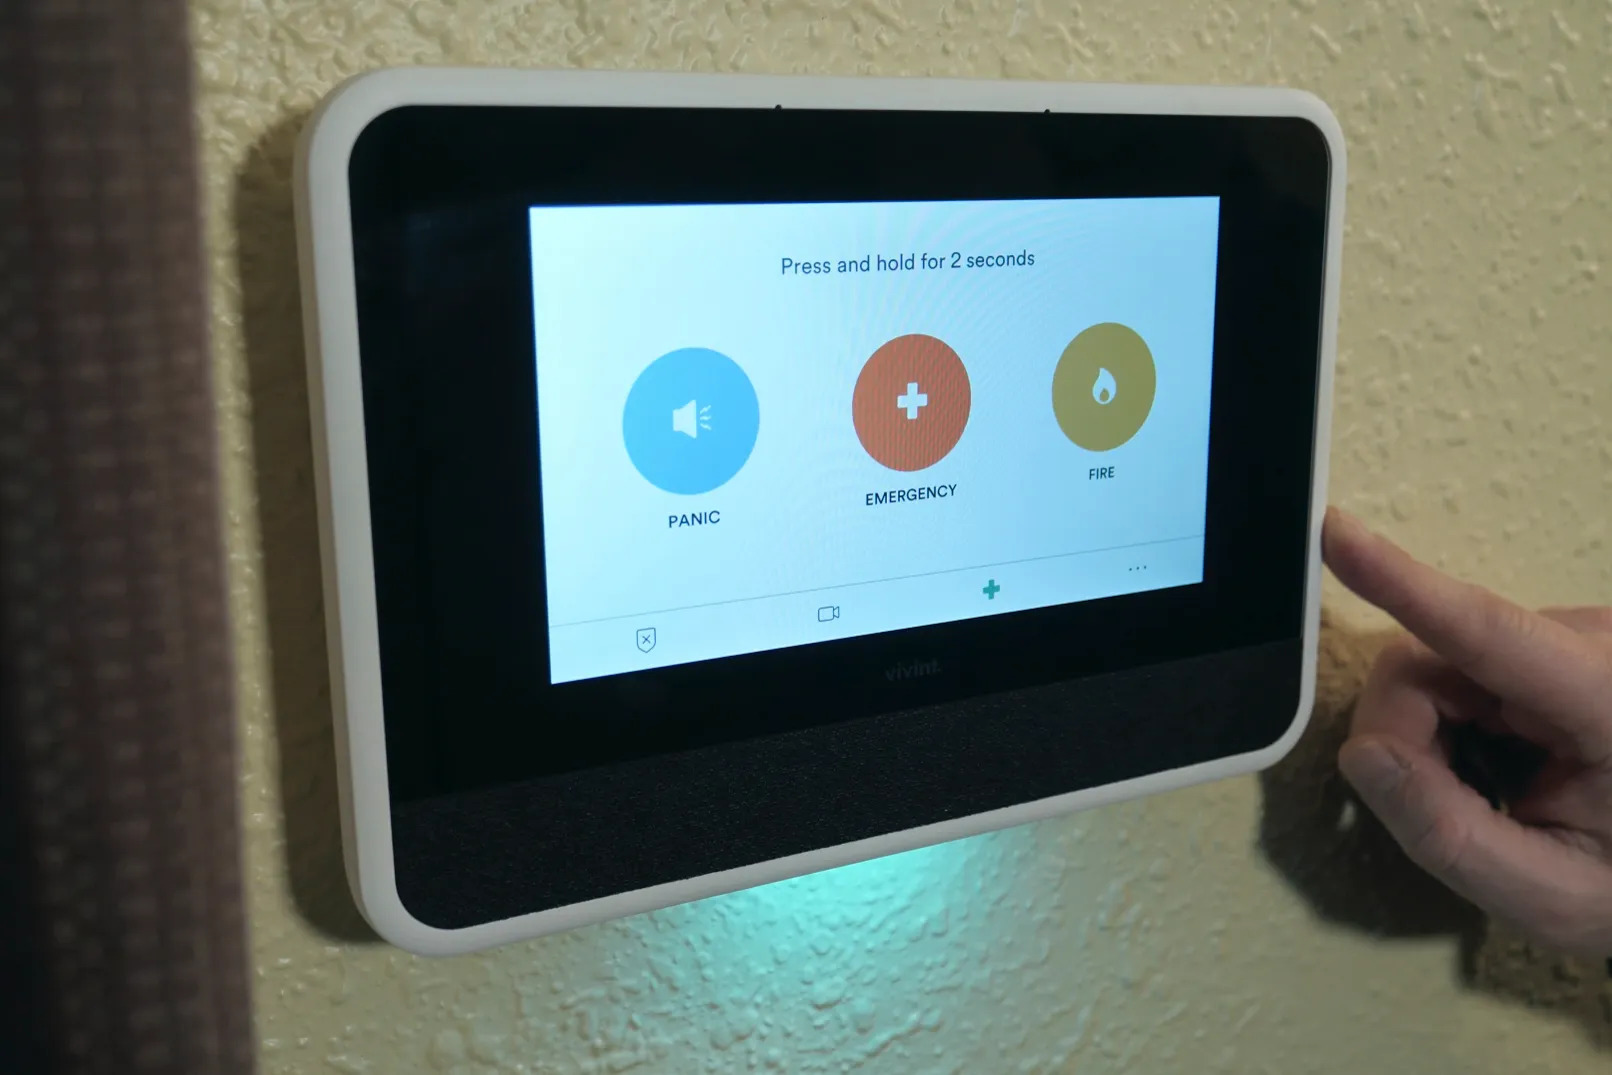 What Causes Vivint Home Security System To Lose Sound?